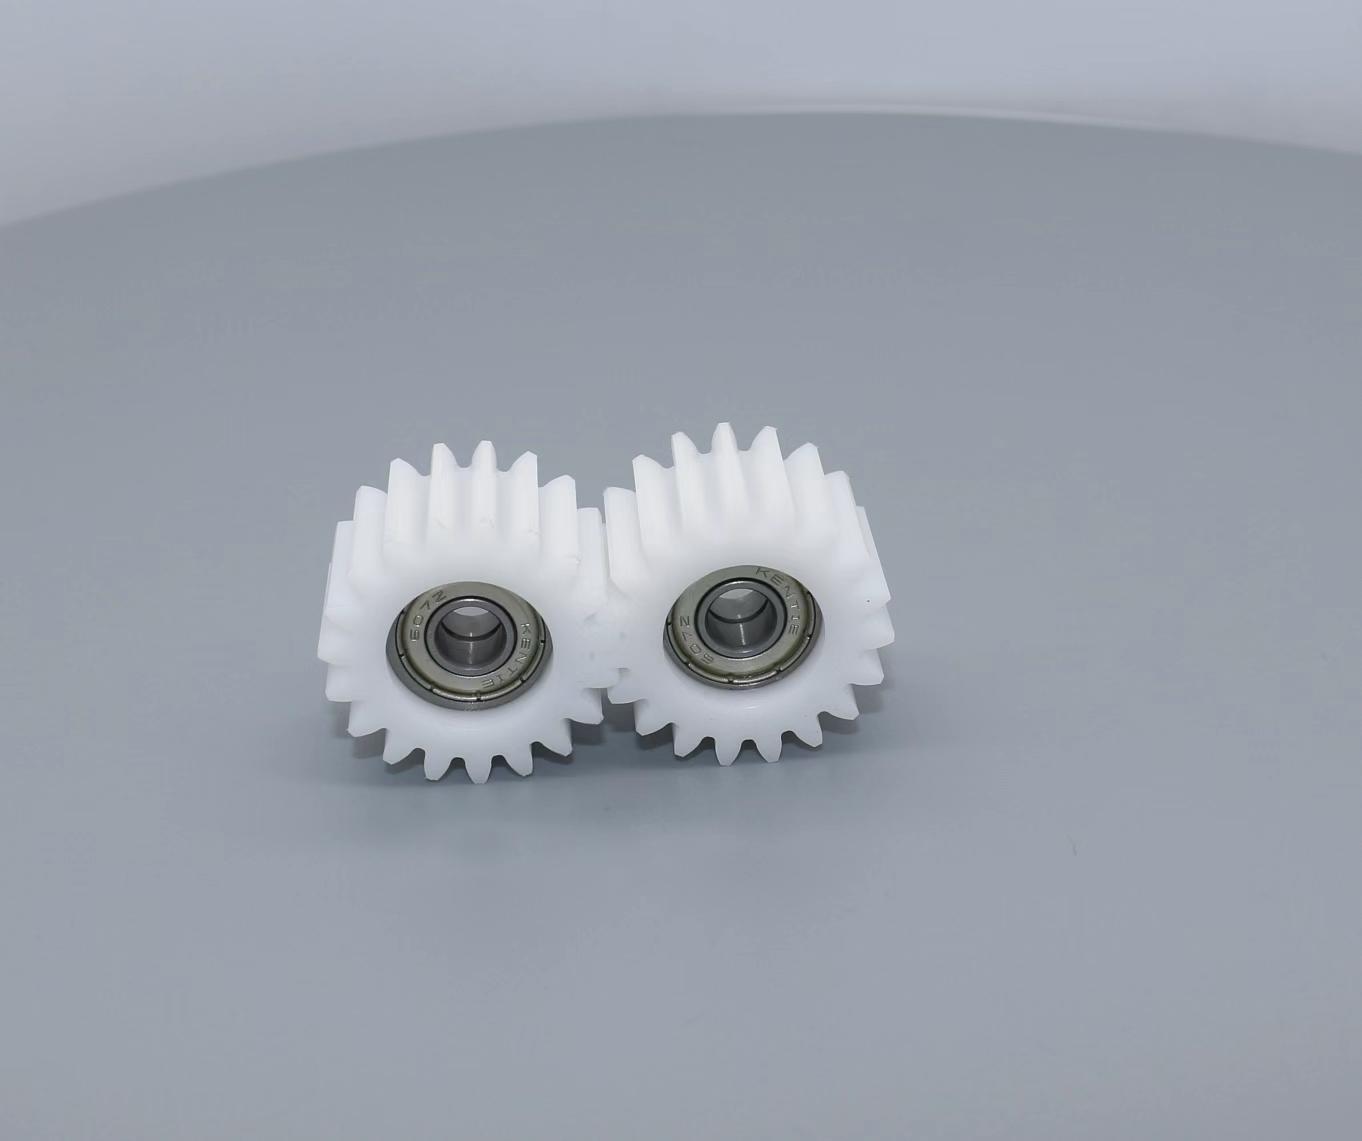 Plastic Gears with Bearings